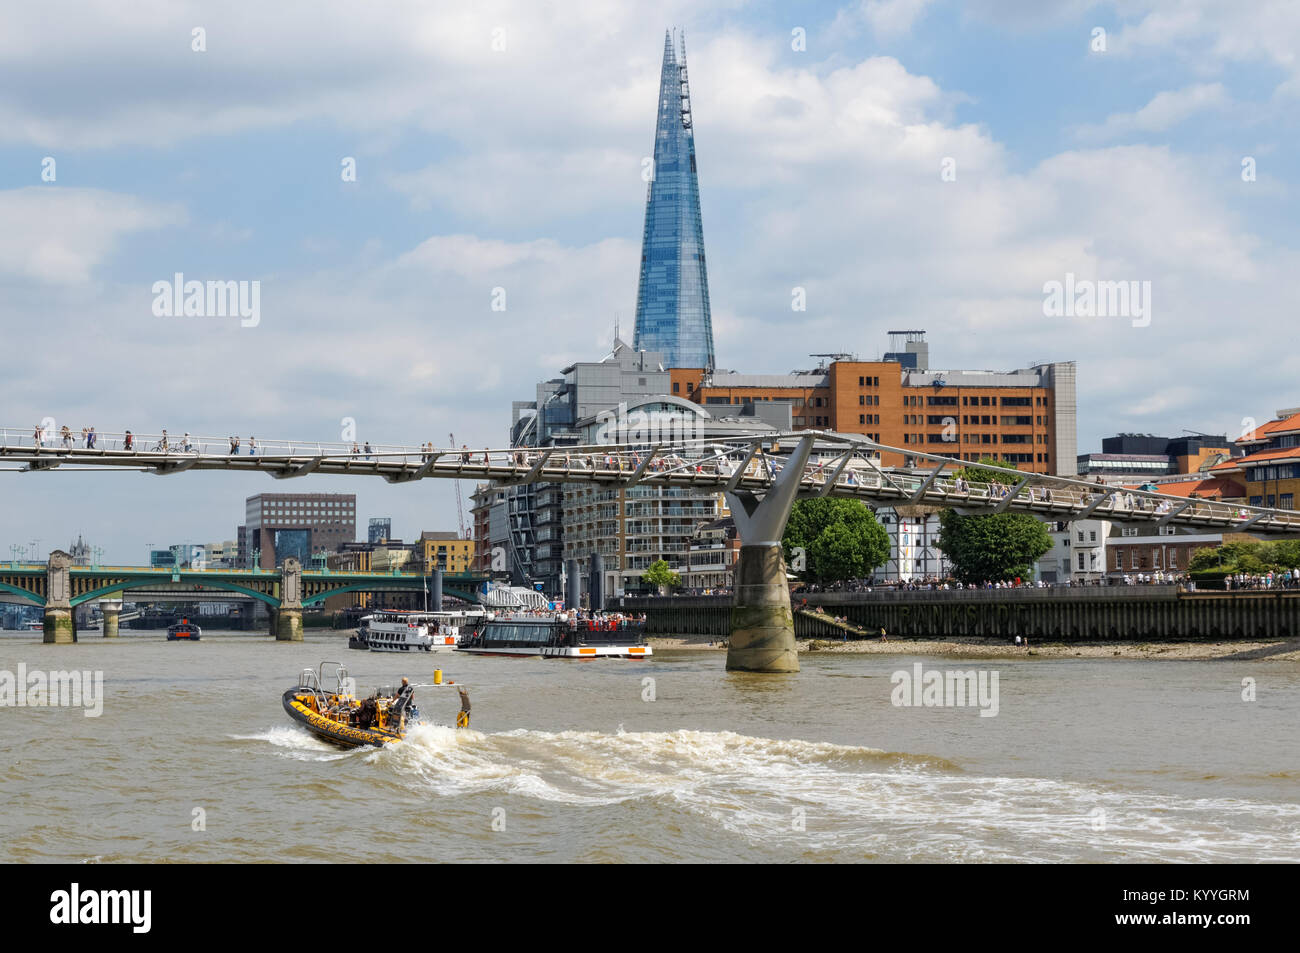 River Thames and Millennium Bridge with the Shard skyscraper in the background, London, England, United Kingdom, UK Stock Photo